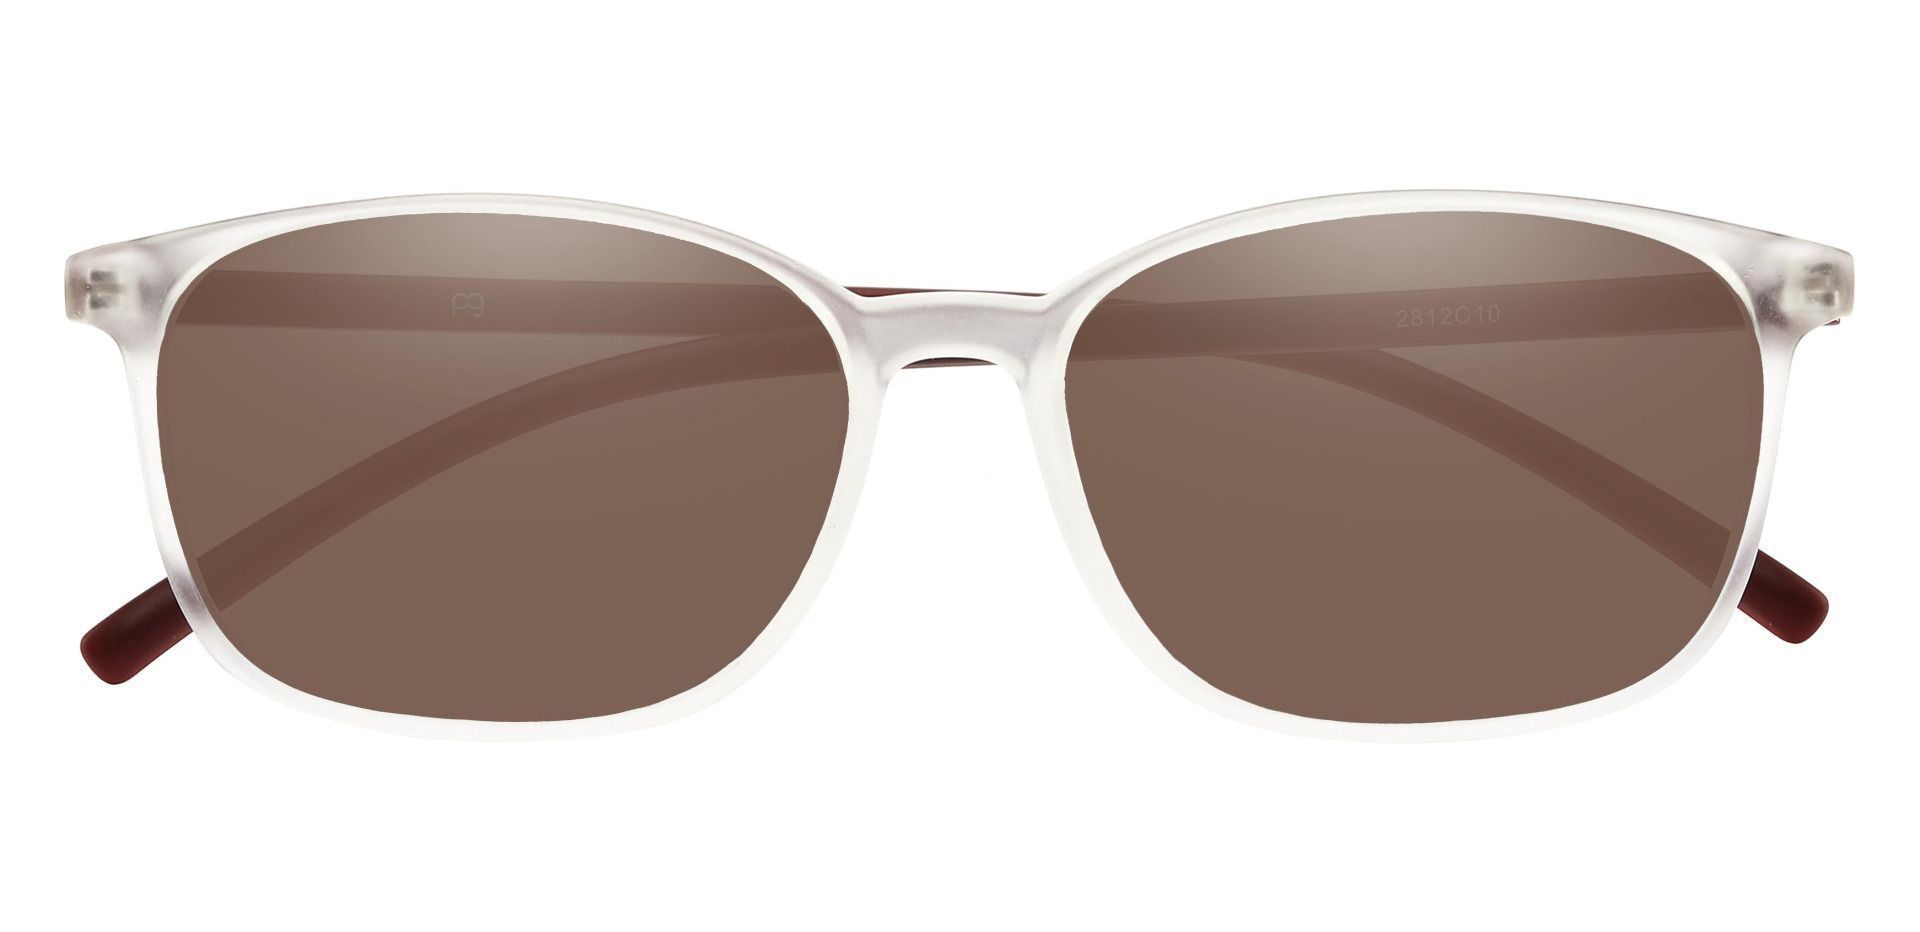 Onyx Square Lined Bifocal Sunglasses - Clear Frame With Brown Lenses